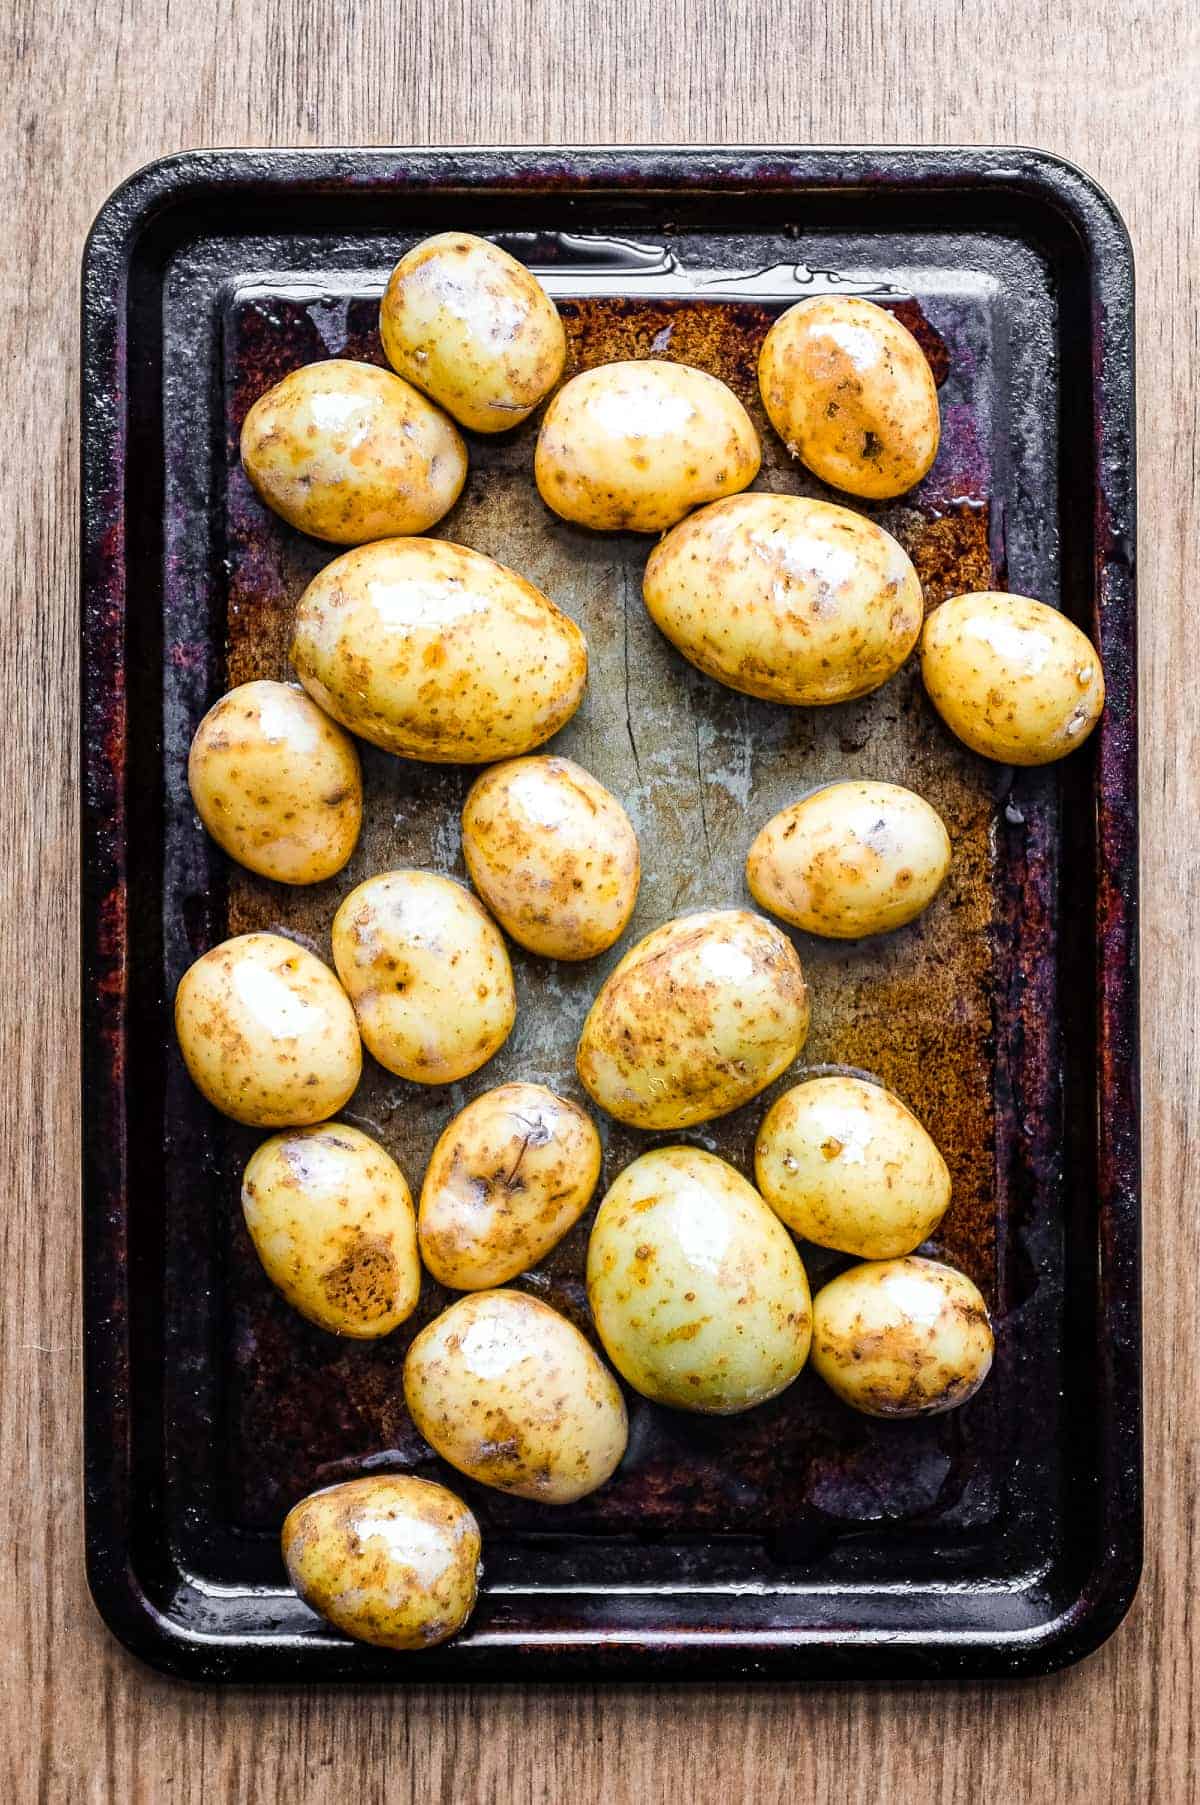 A baking sheet with baby potatoes